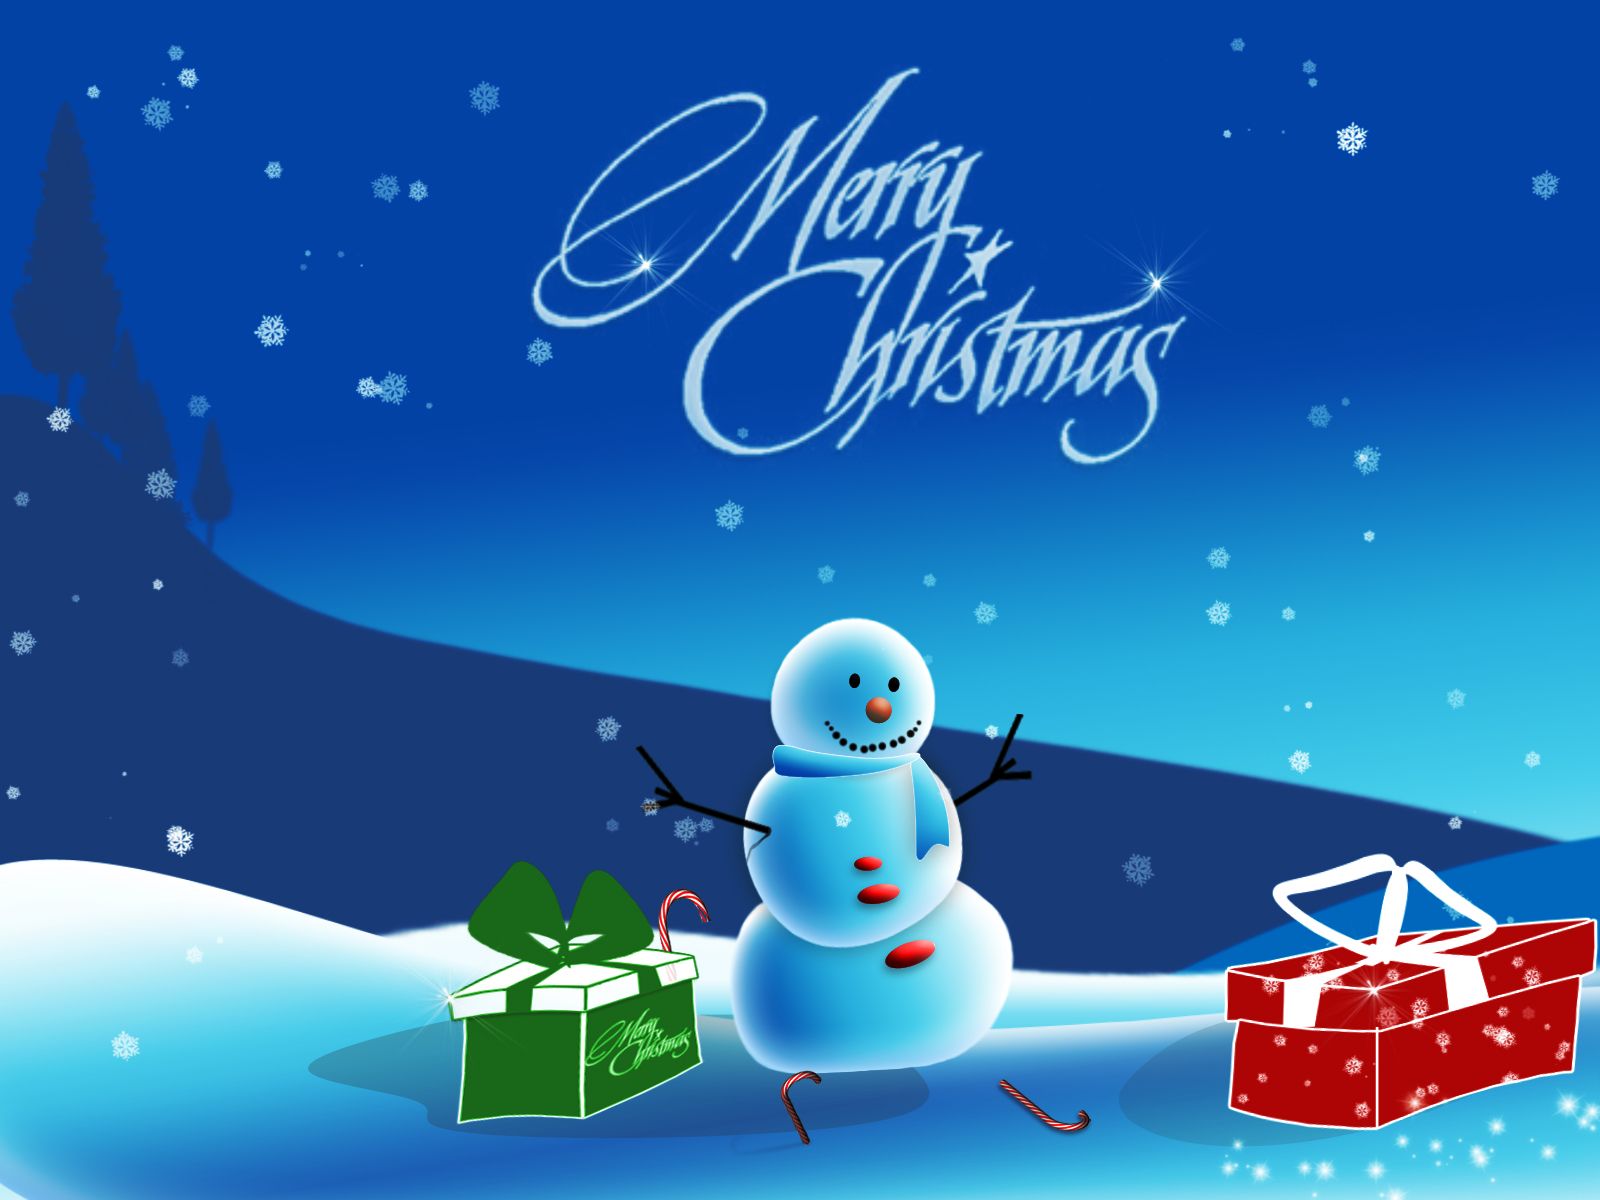 Merry Christmas Wallpapers HD 2015 free download | Wallpapers ...